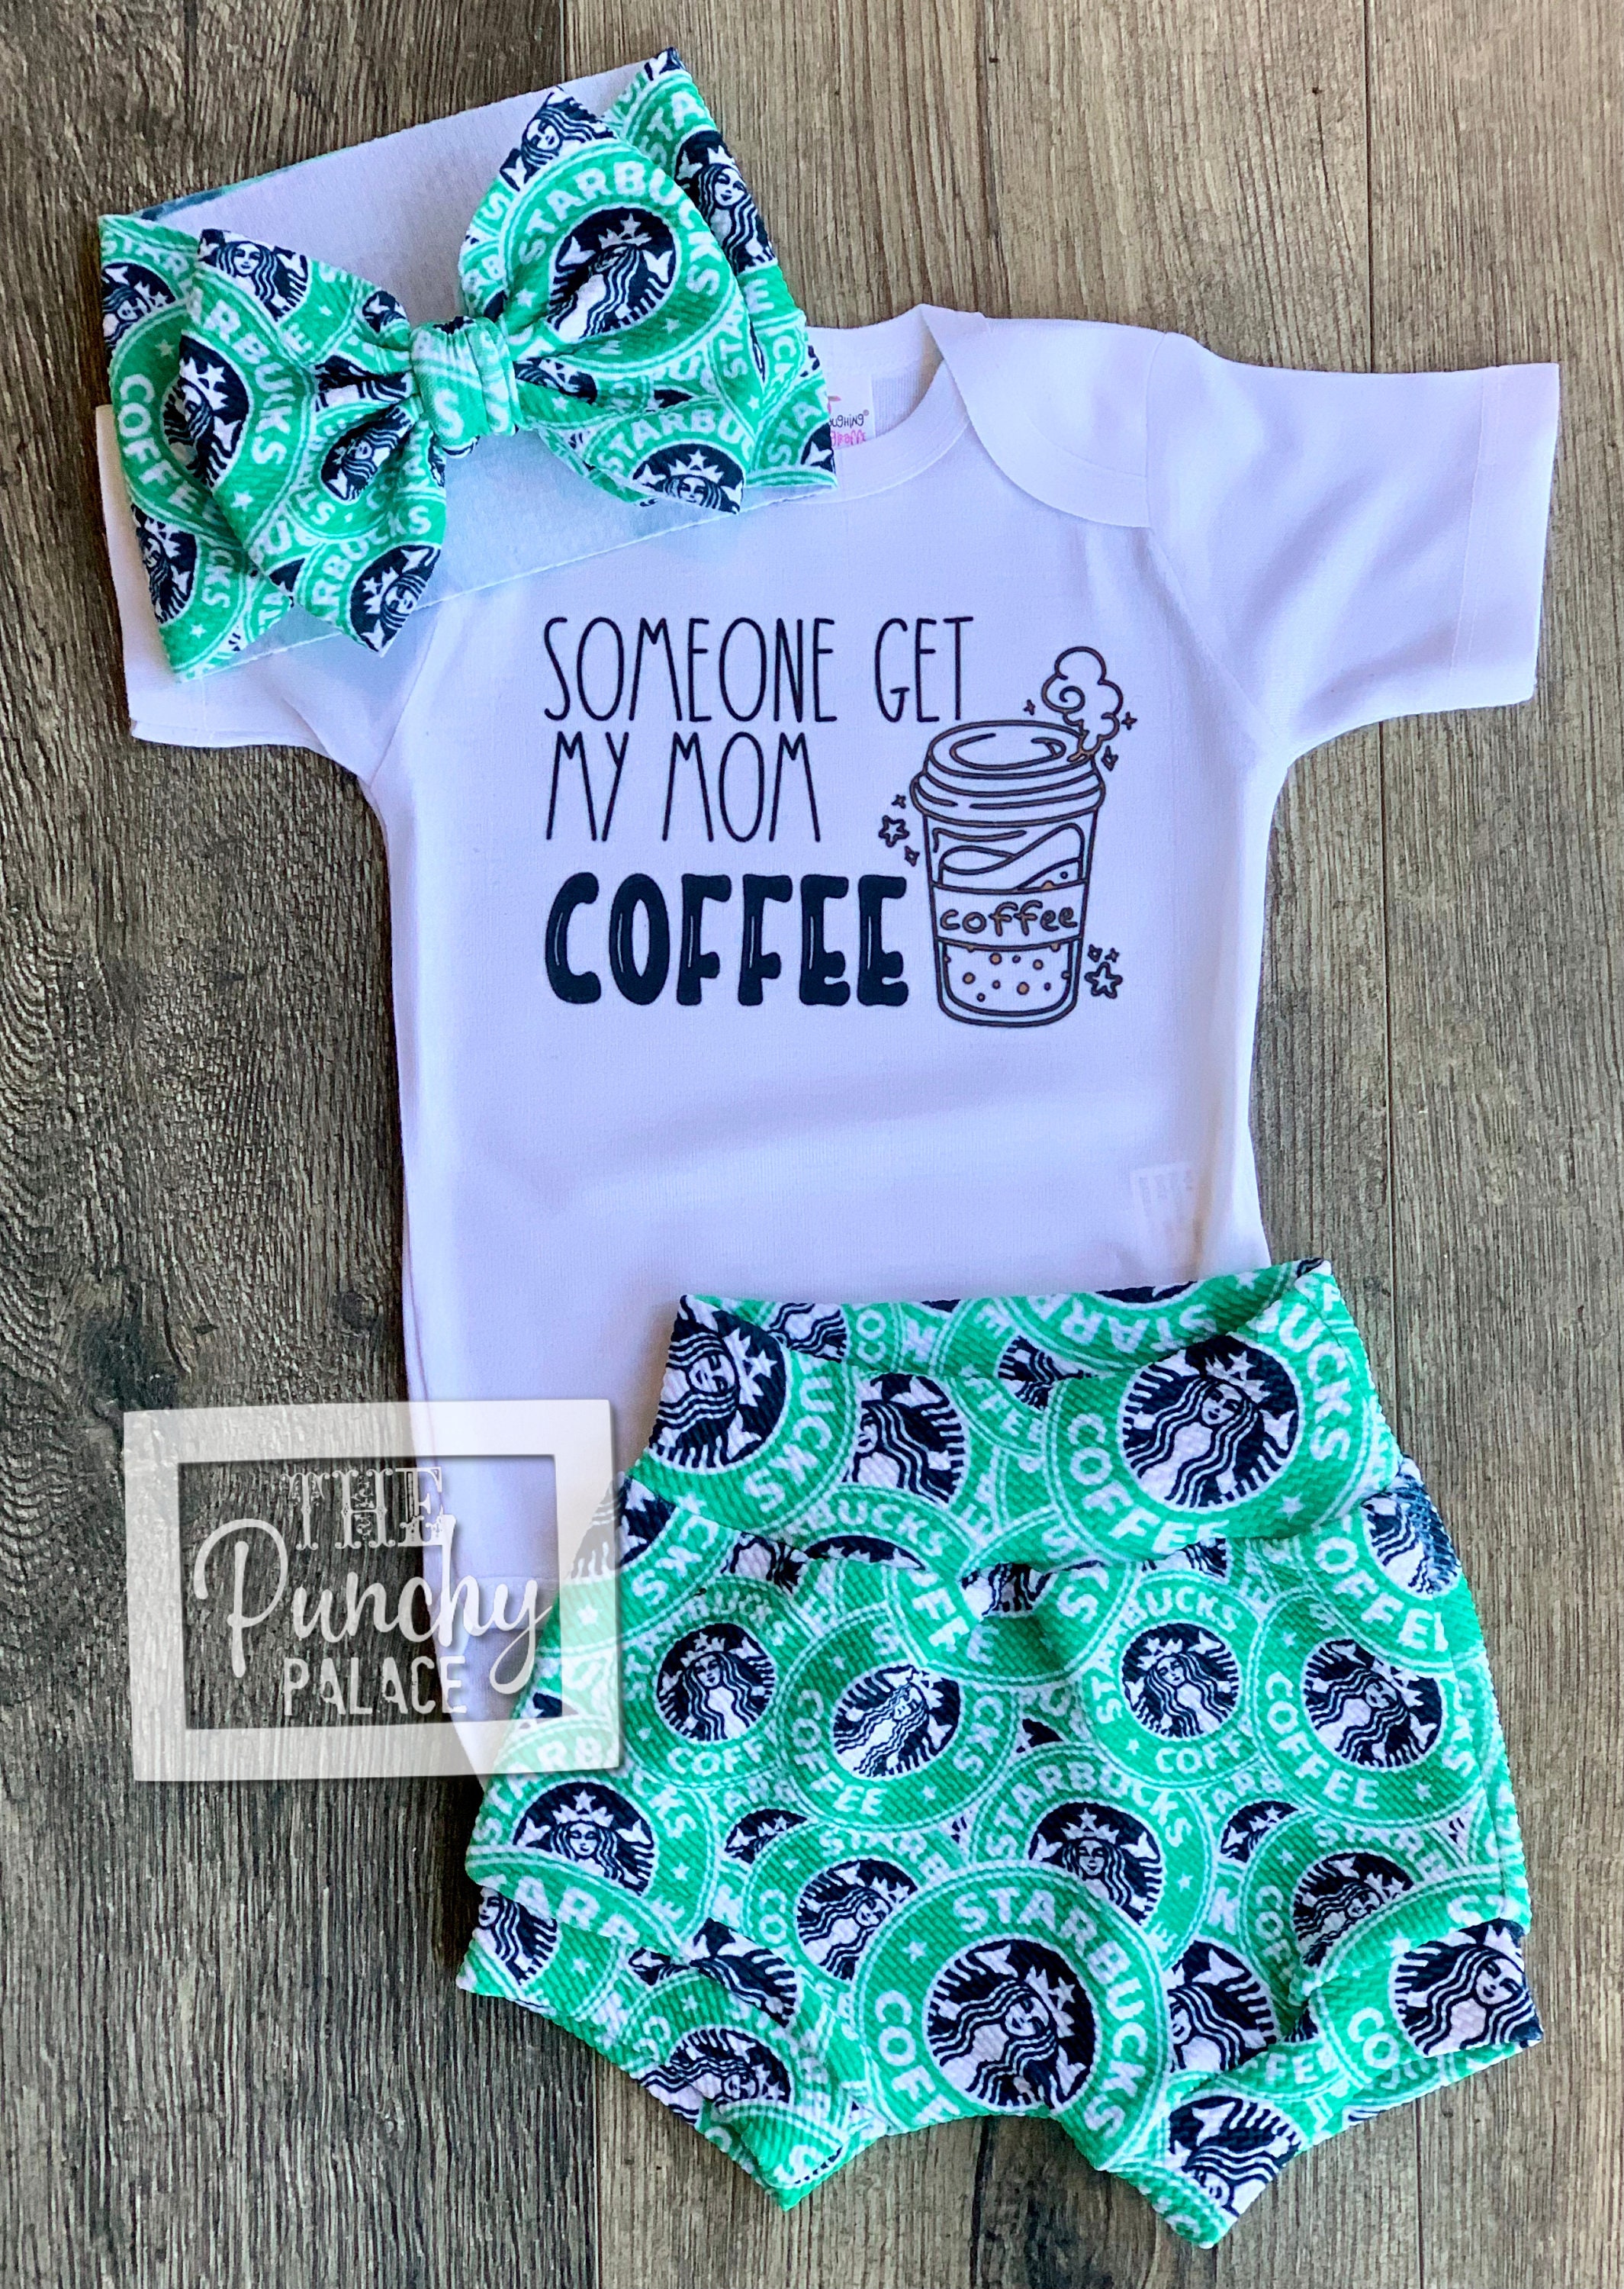 Shop STARBUCKS Unisex Street Style Collaboration Baby Slings & Accessories  by 36&kichiteamo